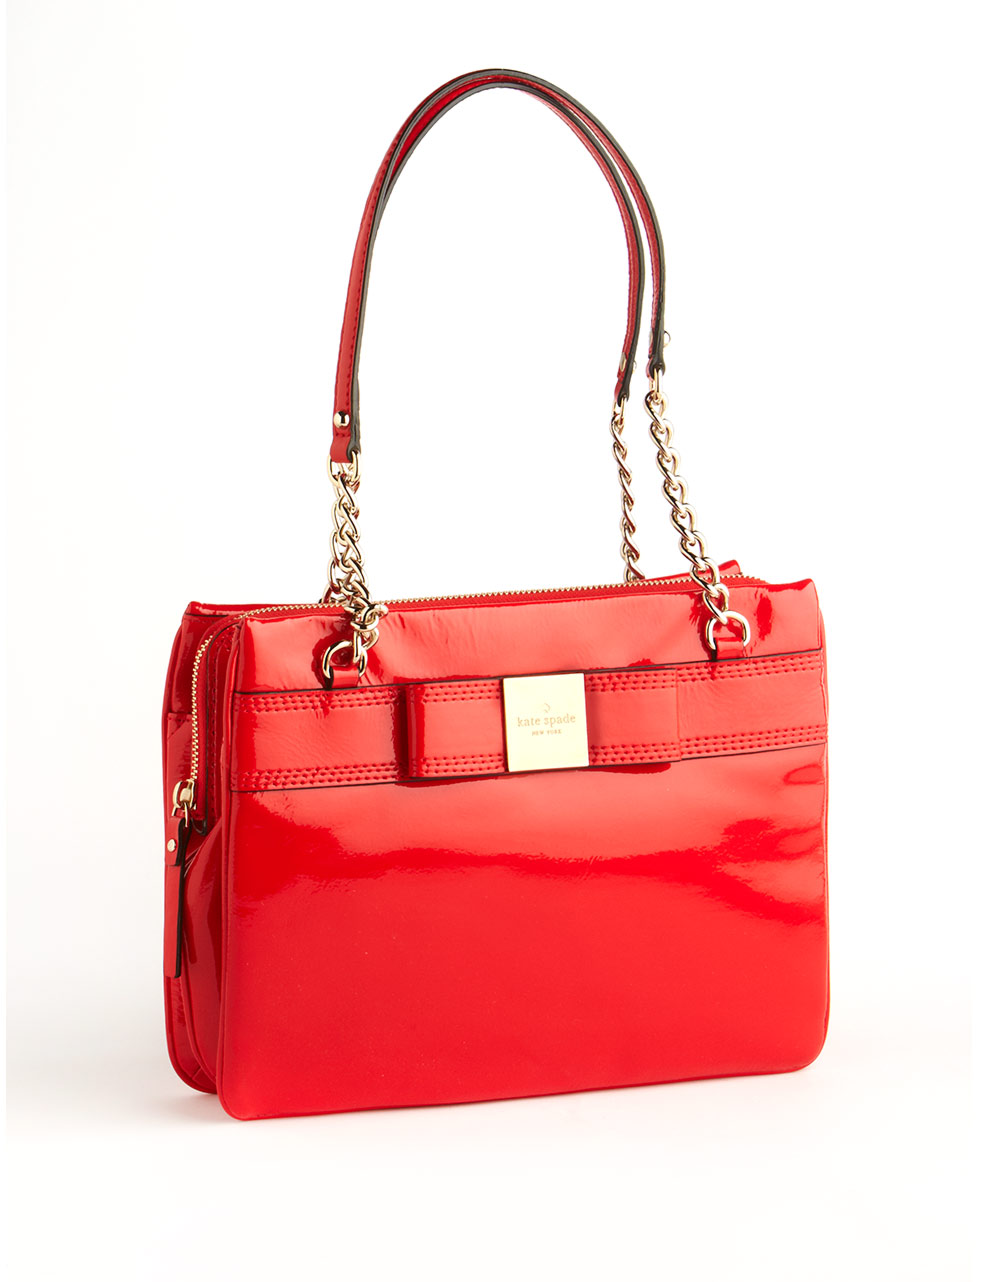 Kate Spade Patent Leather Shoulder Bag in Red - Lyst